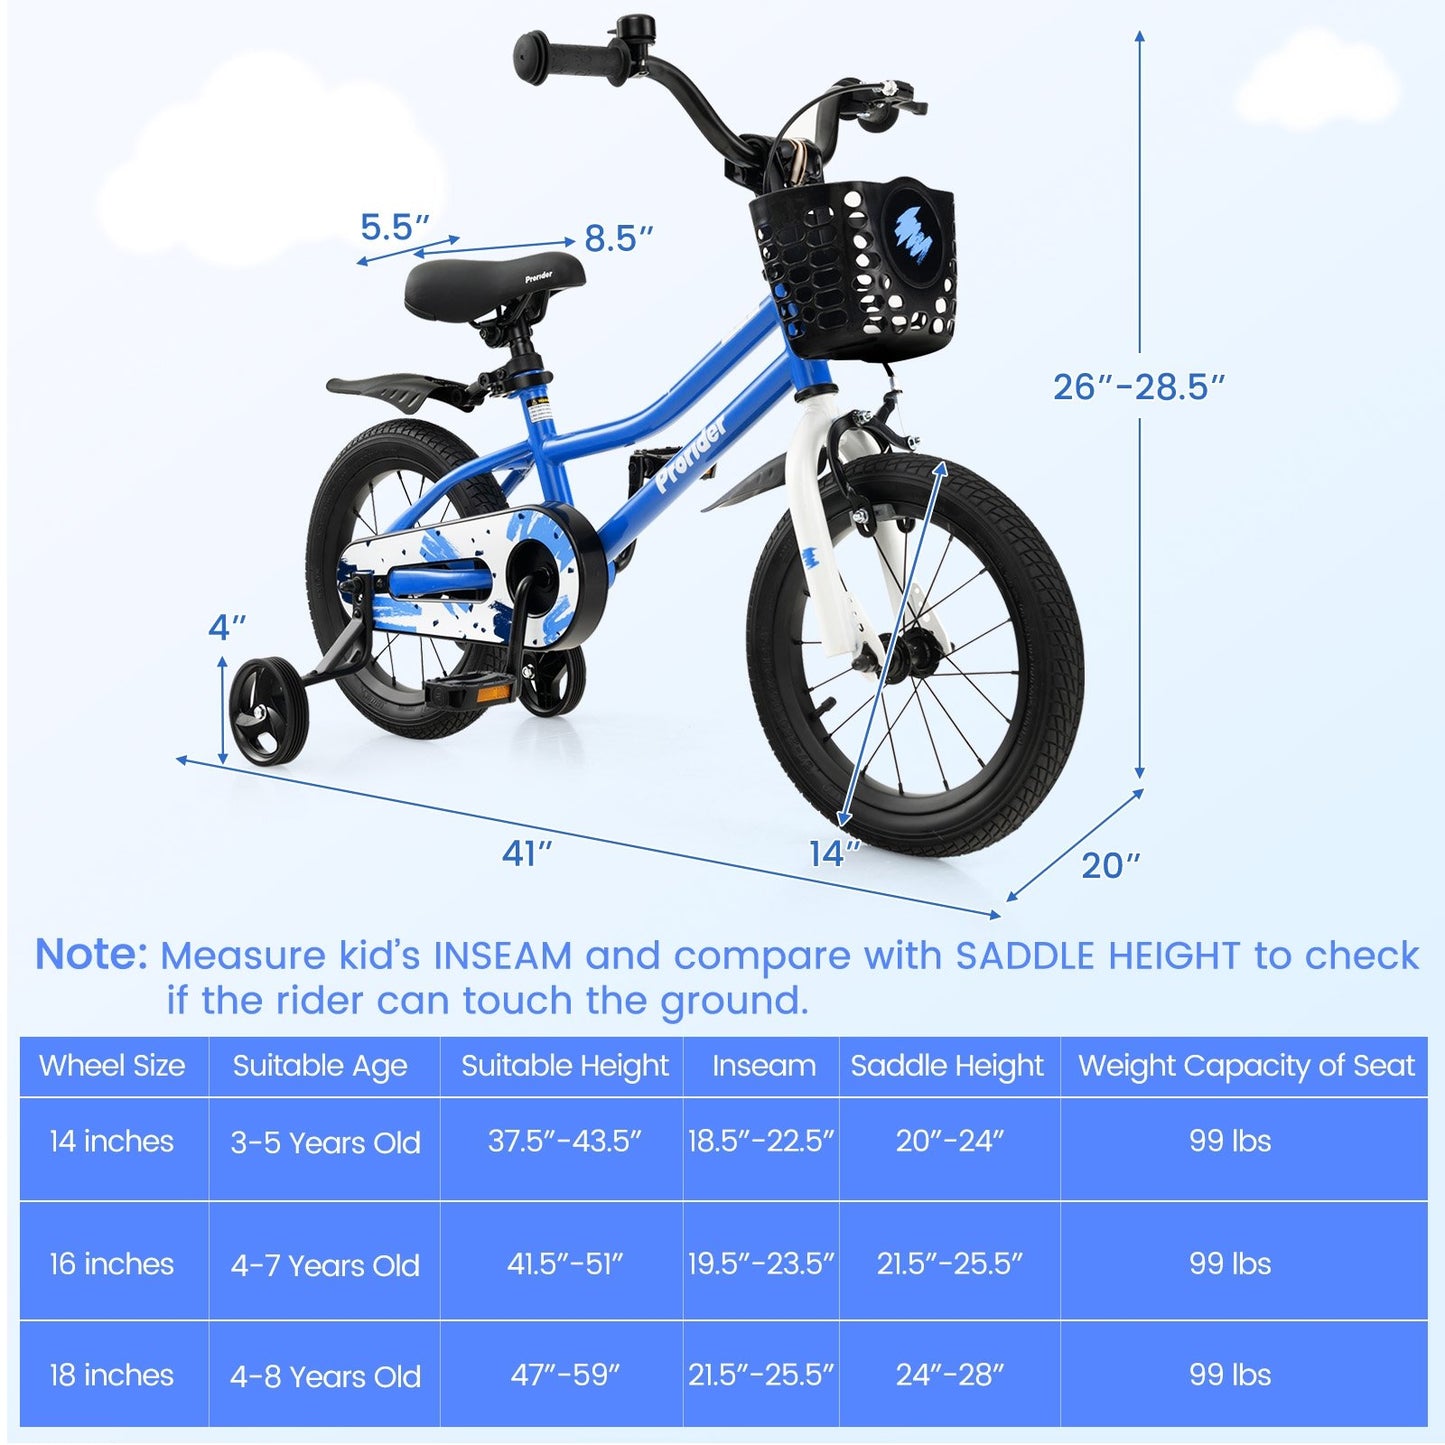 14 Inch Kids Bike with 2 Training Wheels for 3-5 Years Old, Blue